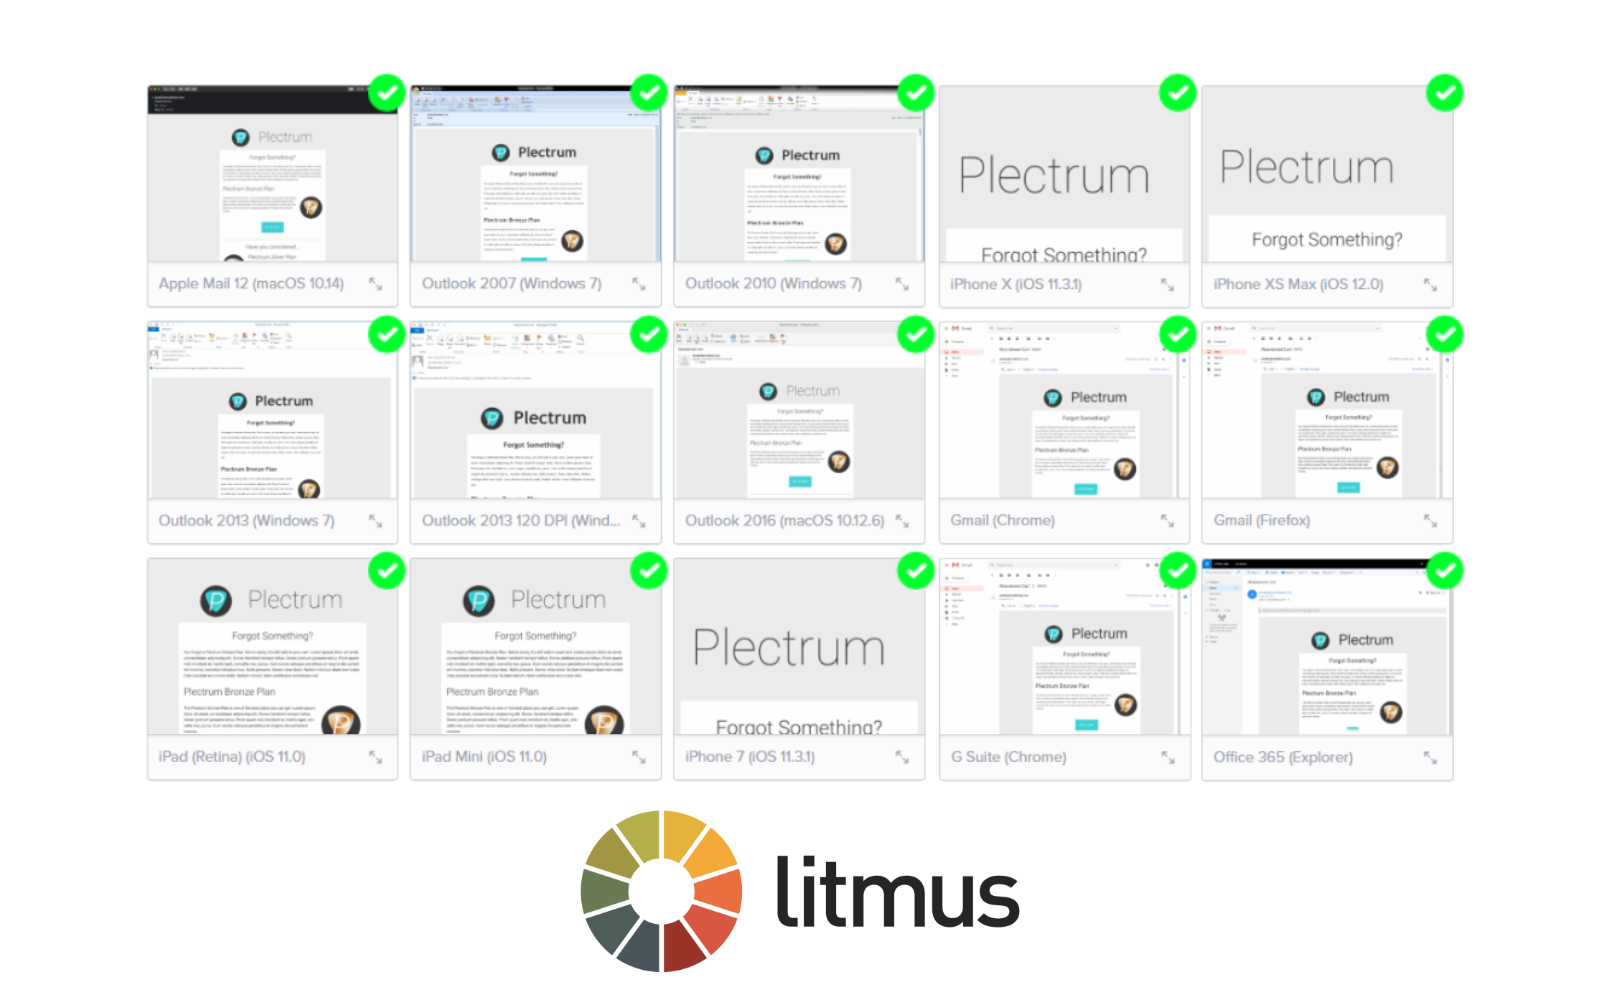 Tested with Litmus